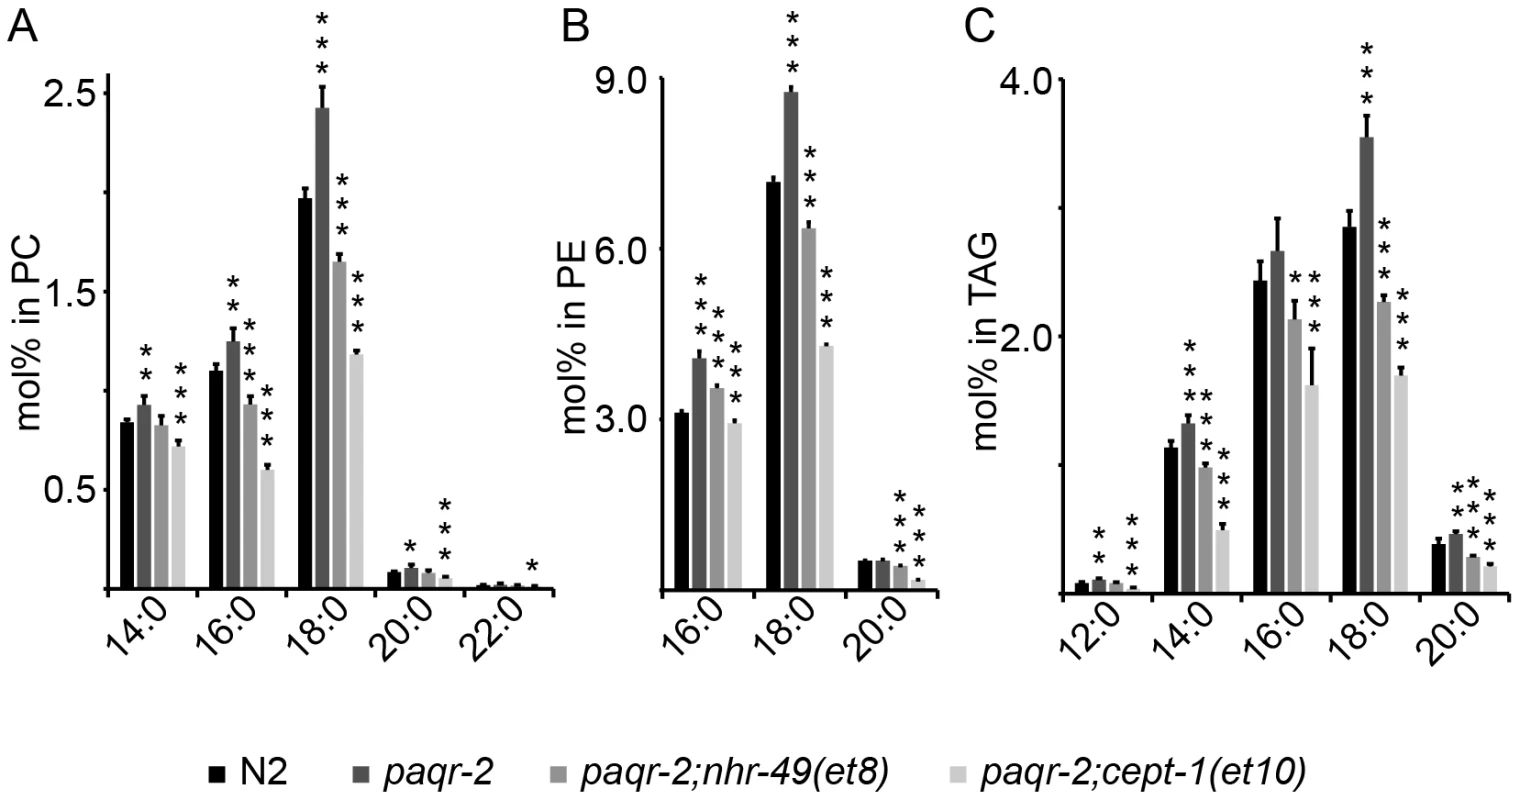 Fatty acid composition defects in the <i>paqr-2</i> mutant.